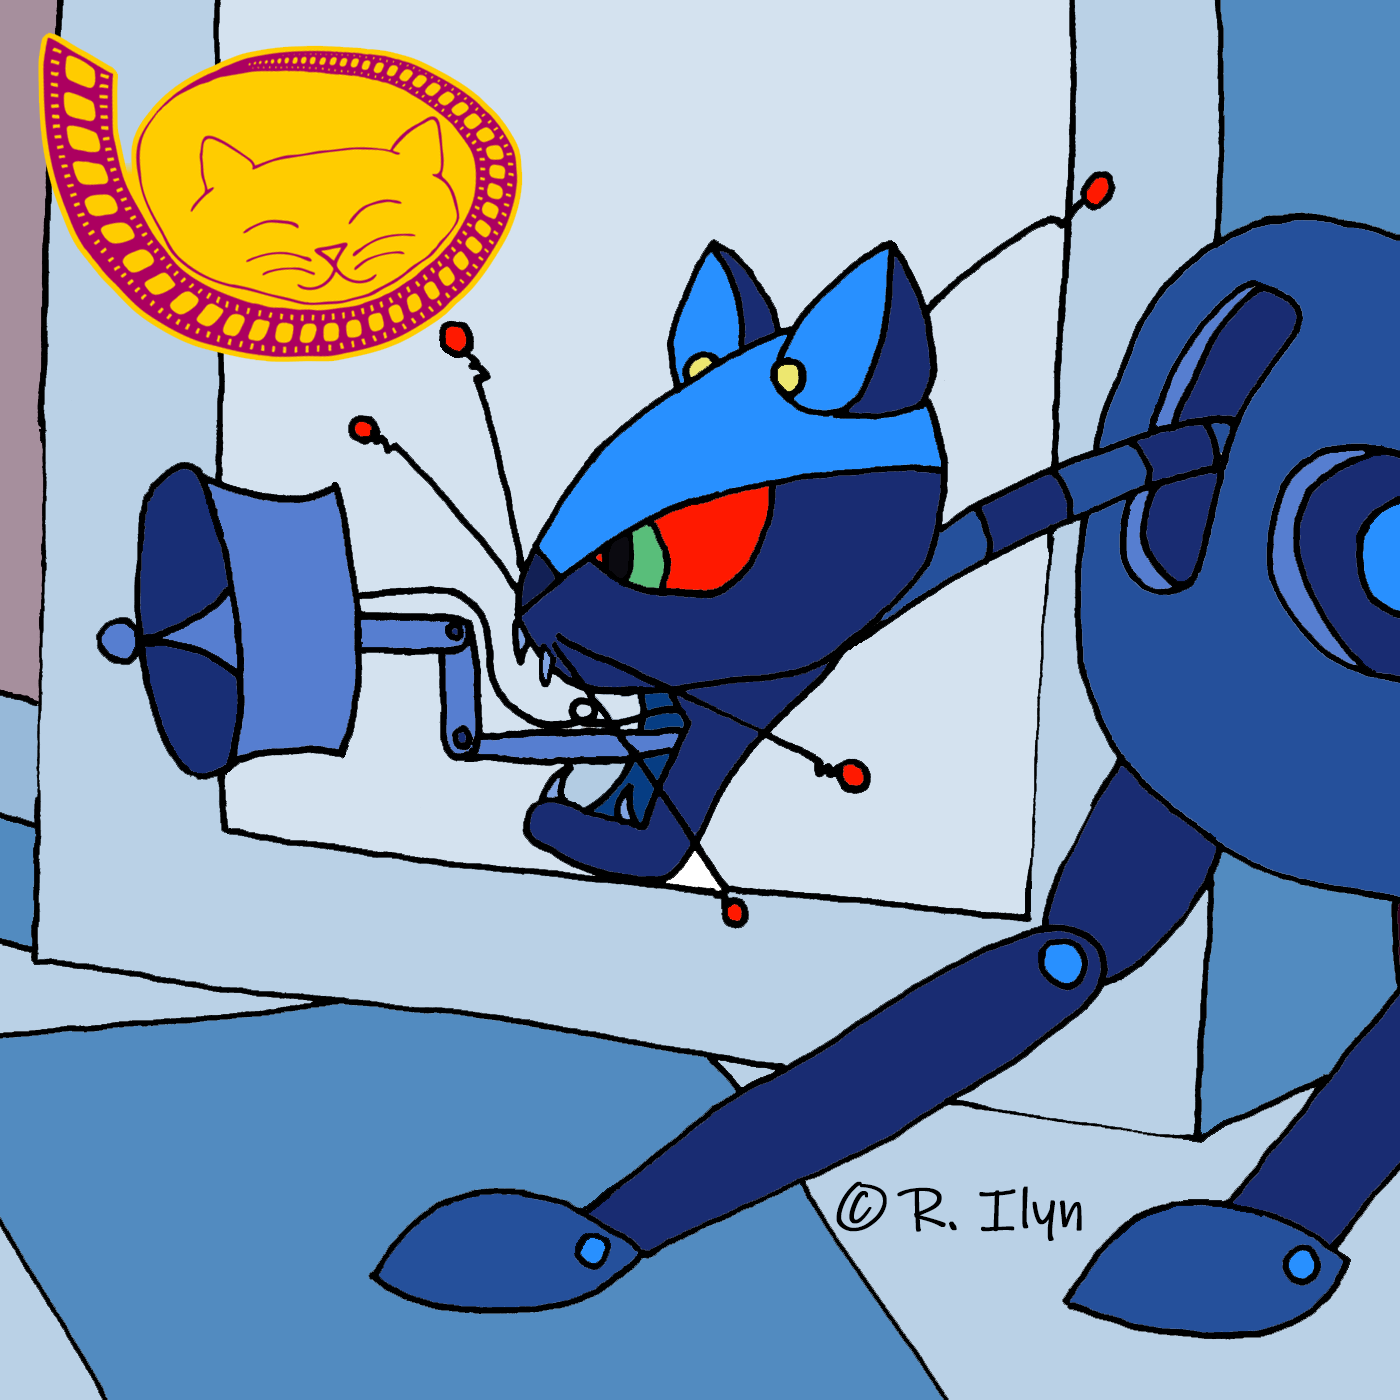 Illustration of Robocat from the movie Stay Tuned